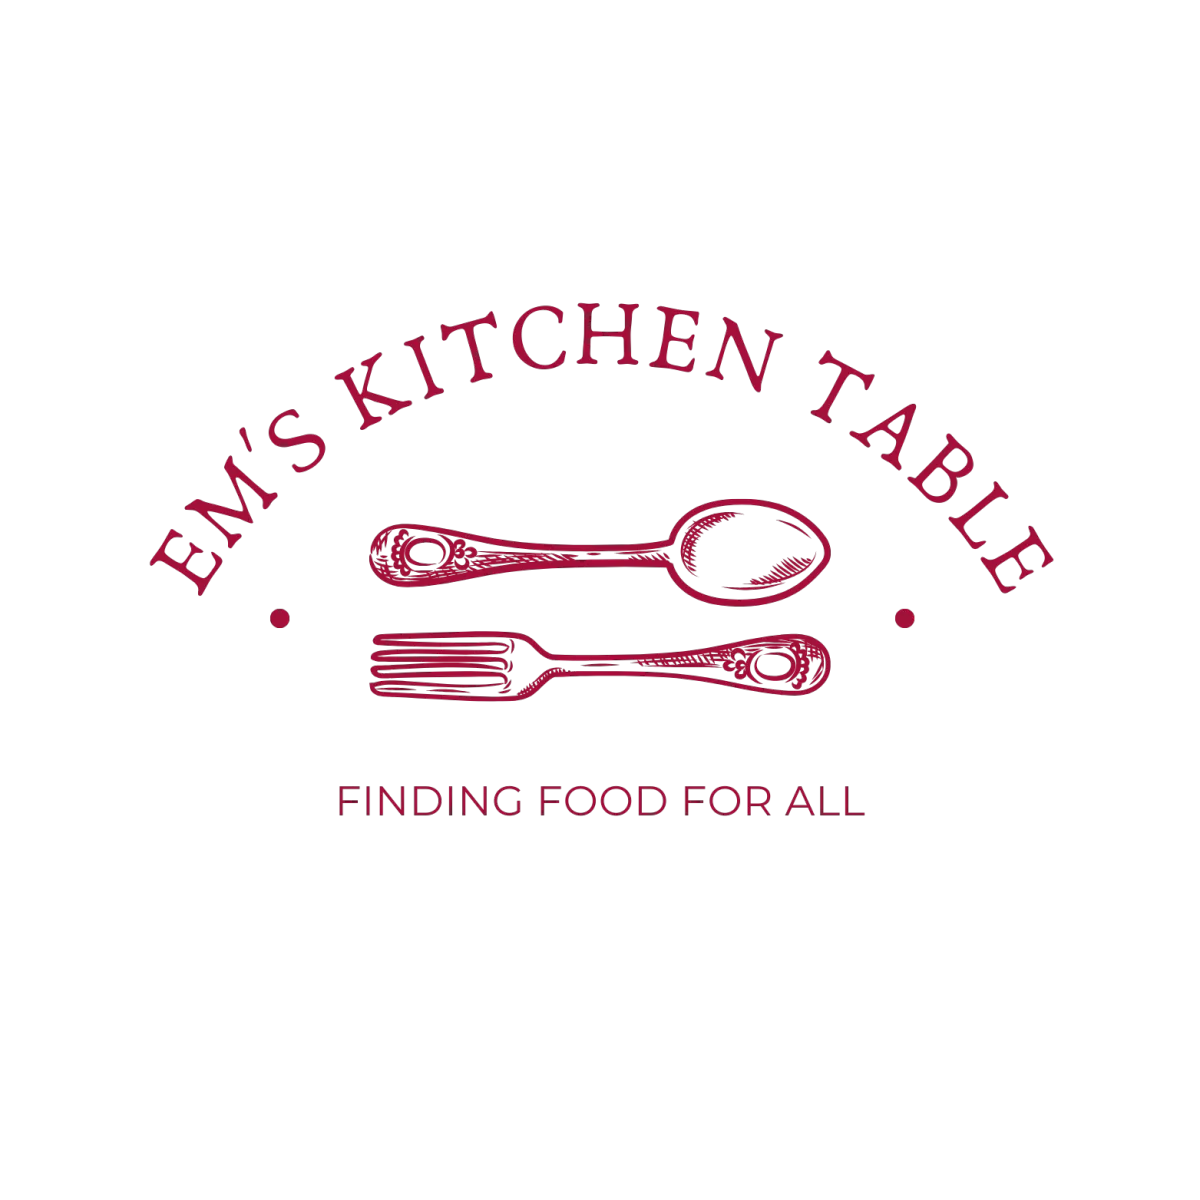 A burgundy fork and spoon with the text Em's Kitchen Table arced over the top and the caption Finding Food For All at the bottom